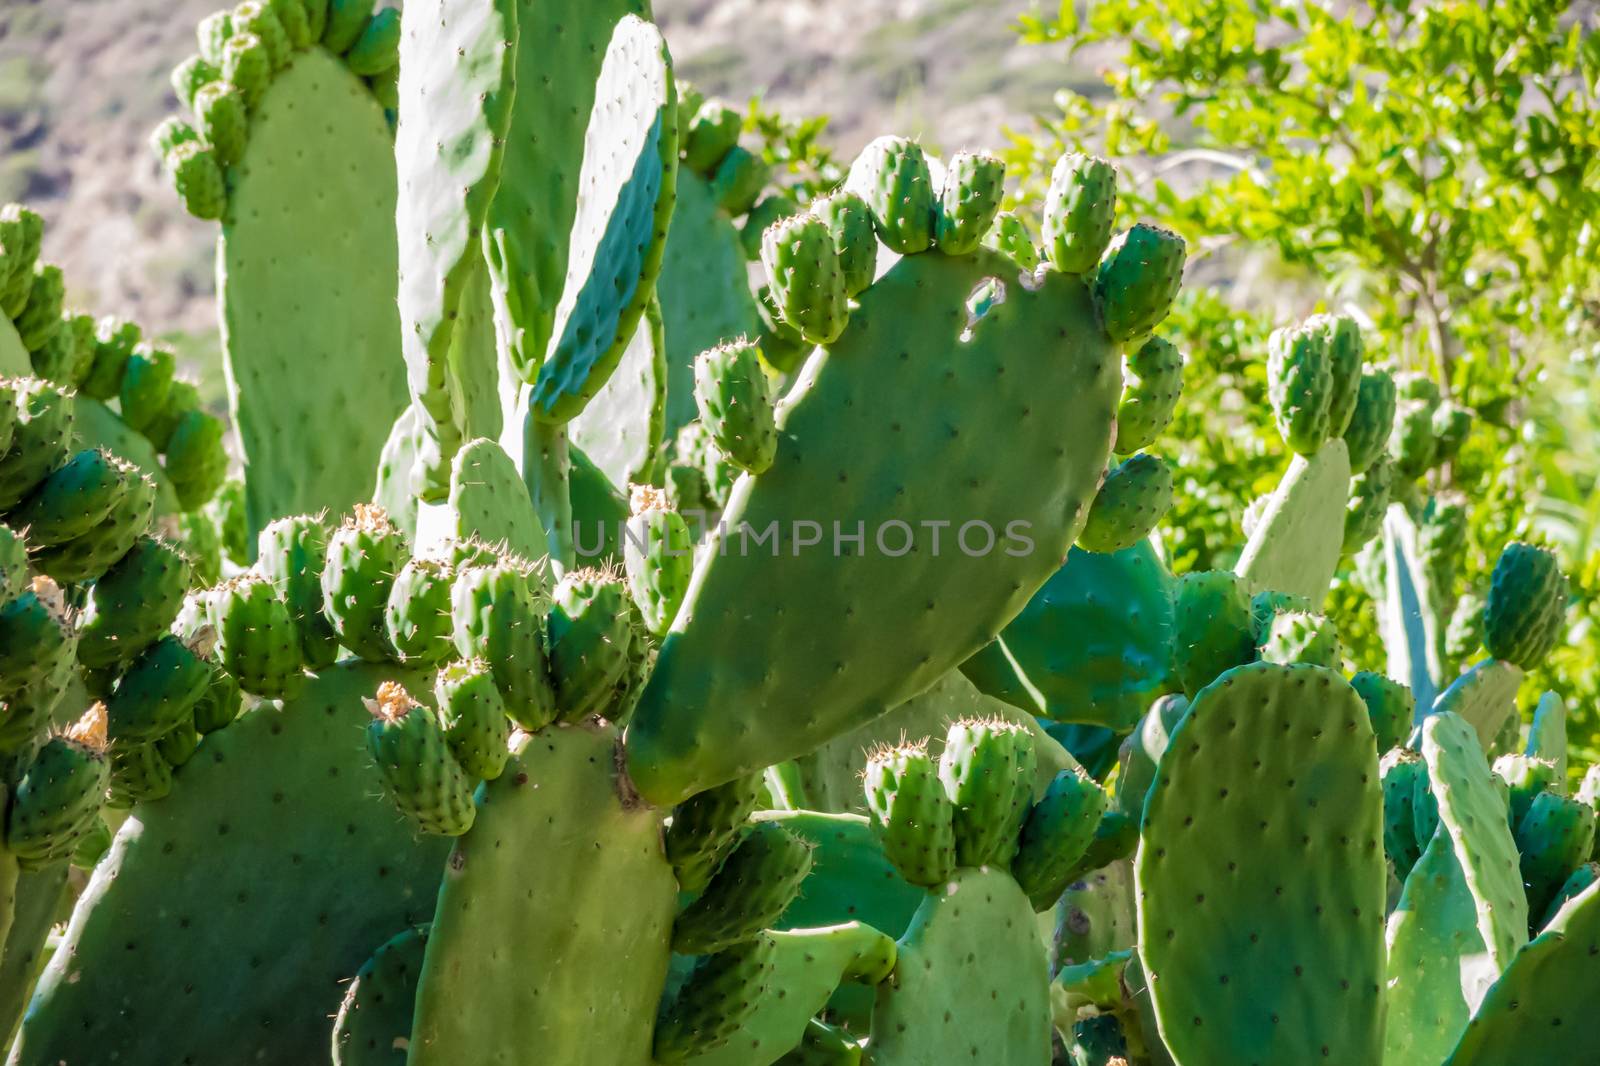 Old cactus with many new leafs in direct sunlight